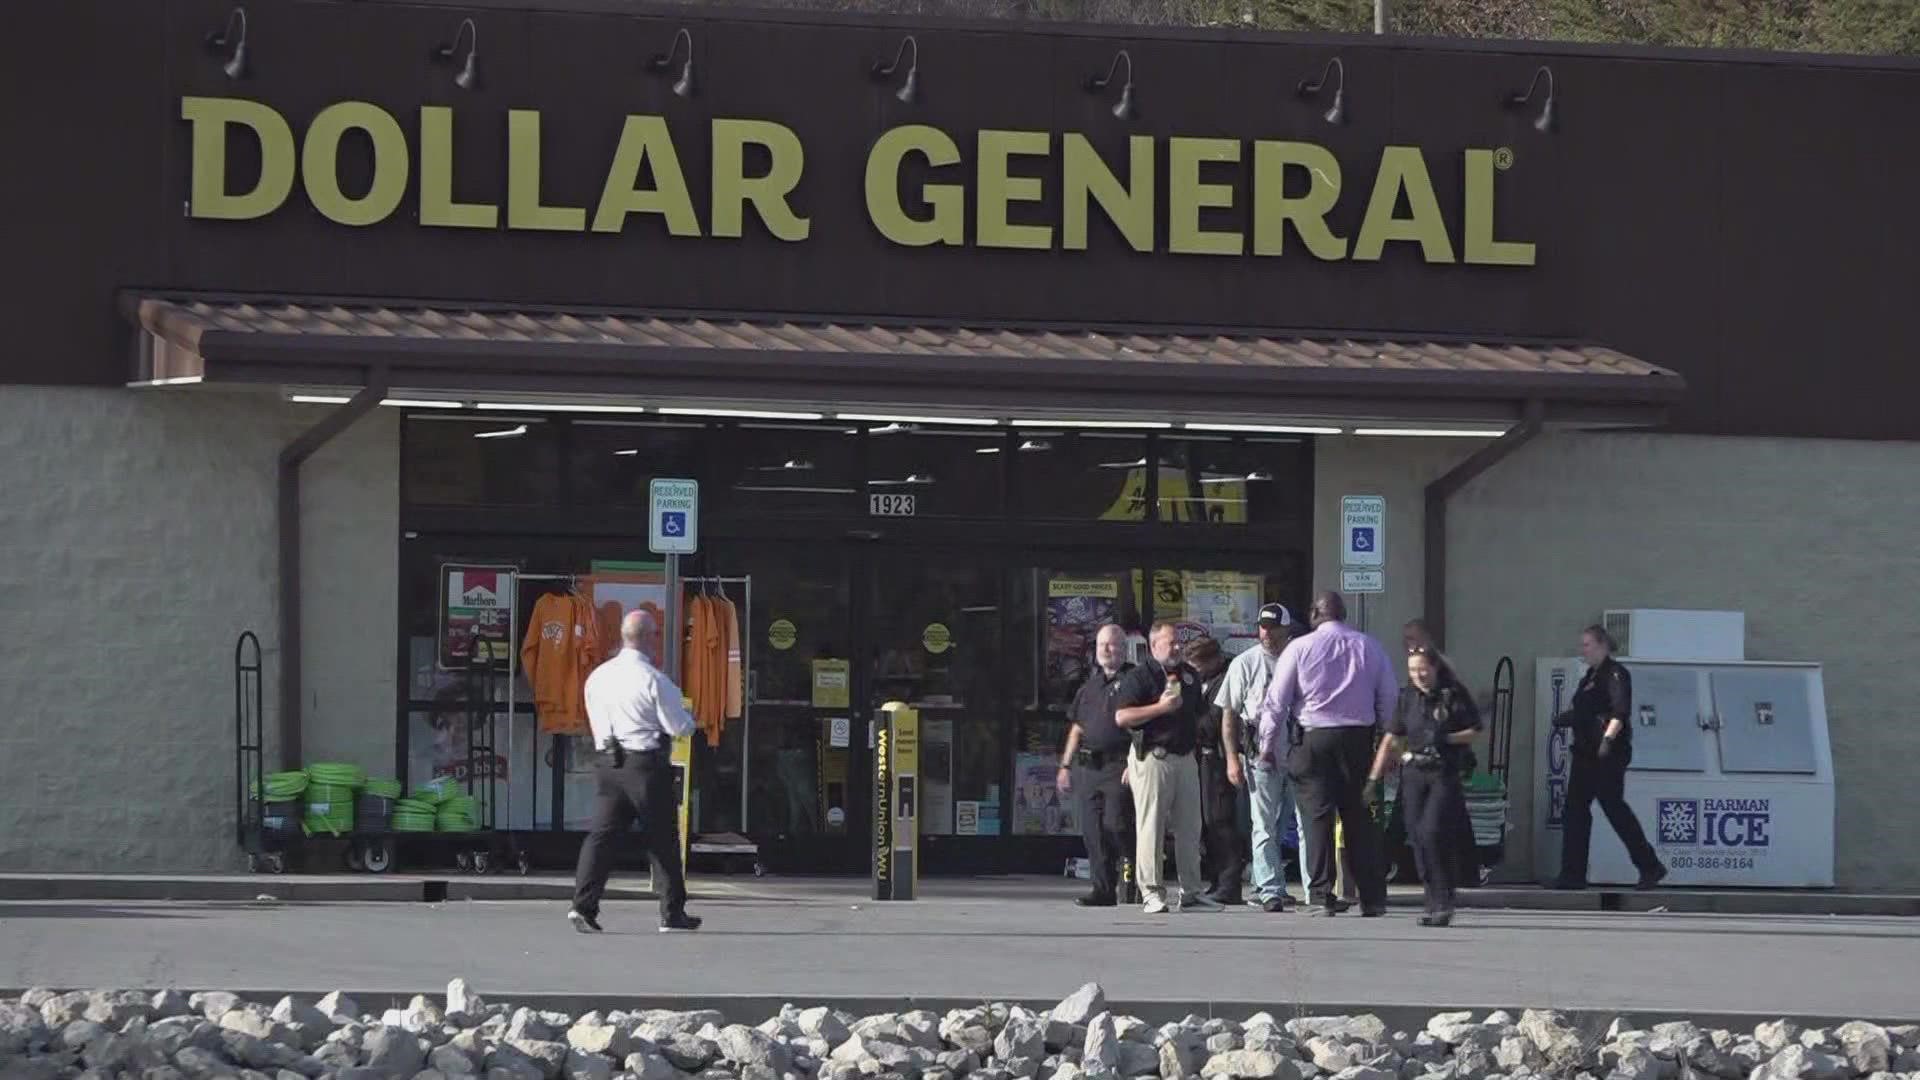 Sheriff Spangler said a traffic stop turned into a standoff situation at a Dollar General off I-75 in Heiskell.